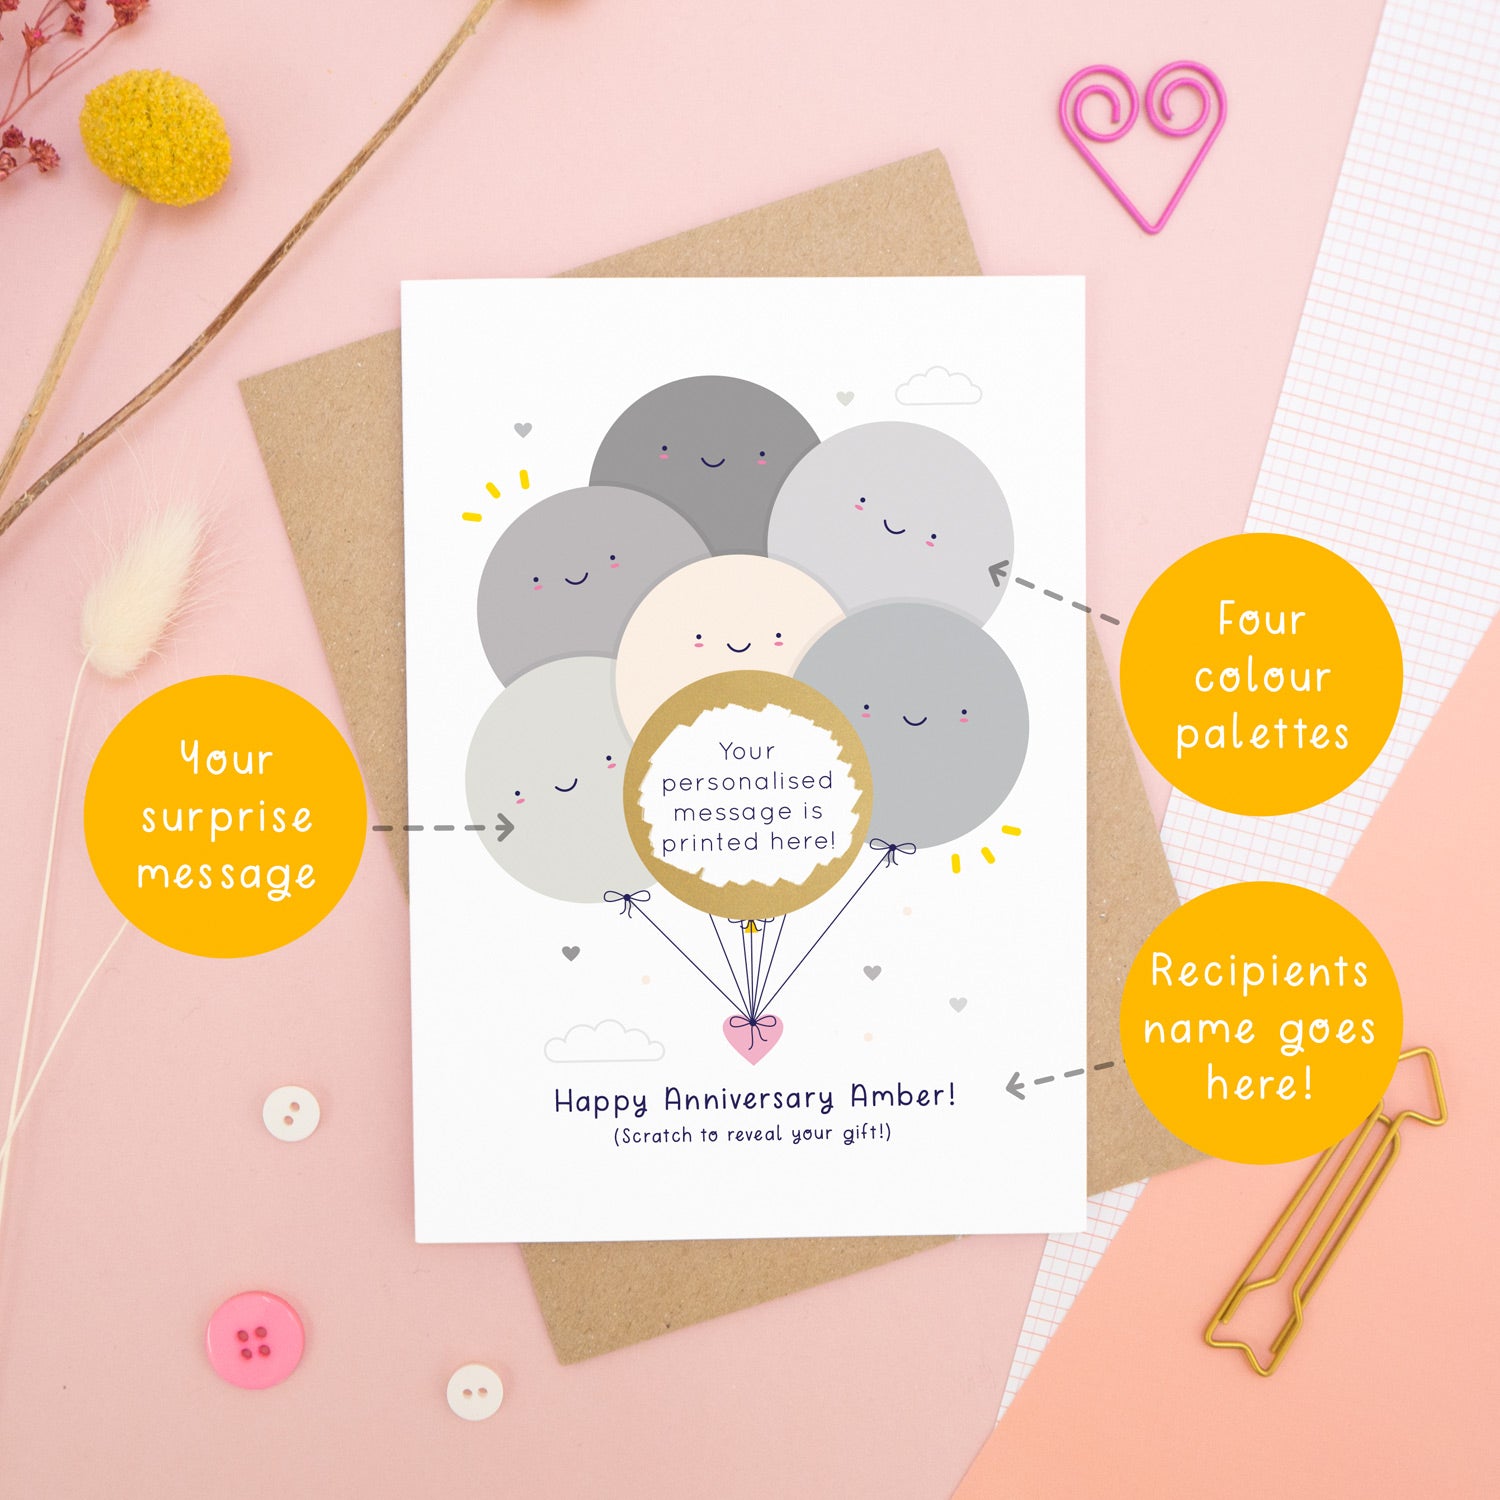 A personalised anniversary scratch card photographed on a pink background with floral props, paper clips, and buttons. This card shows the grey colour scheme and the golden circle has been scratched off to reveal the secret message! Around the card are circles of text pointing to the areas that can be changed (name, colour and personalised message).